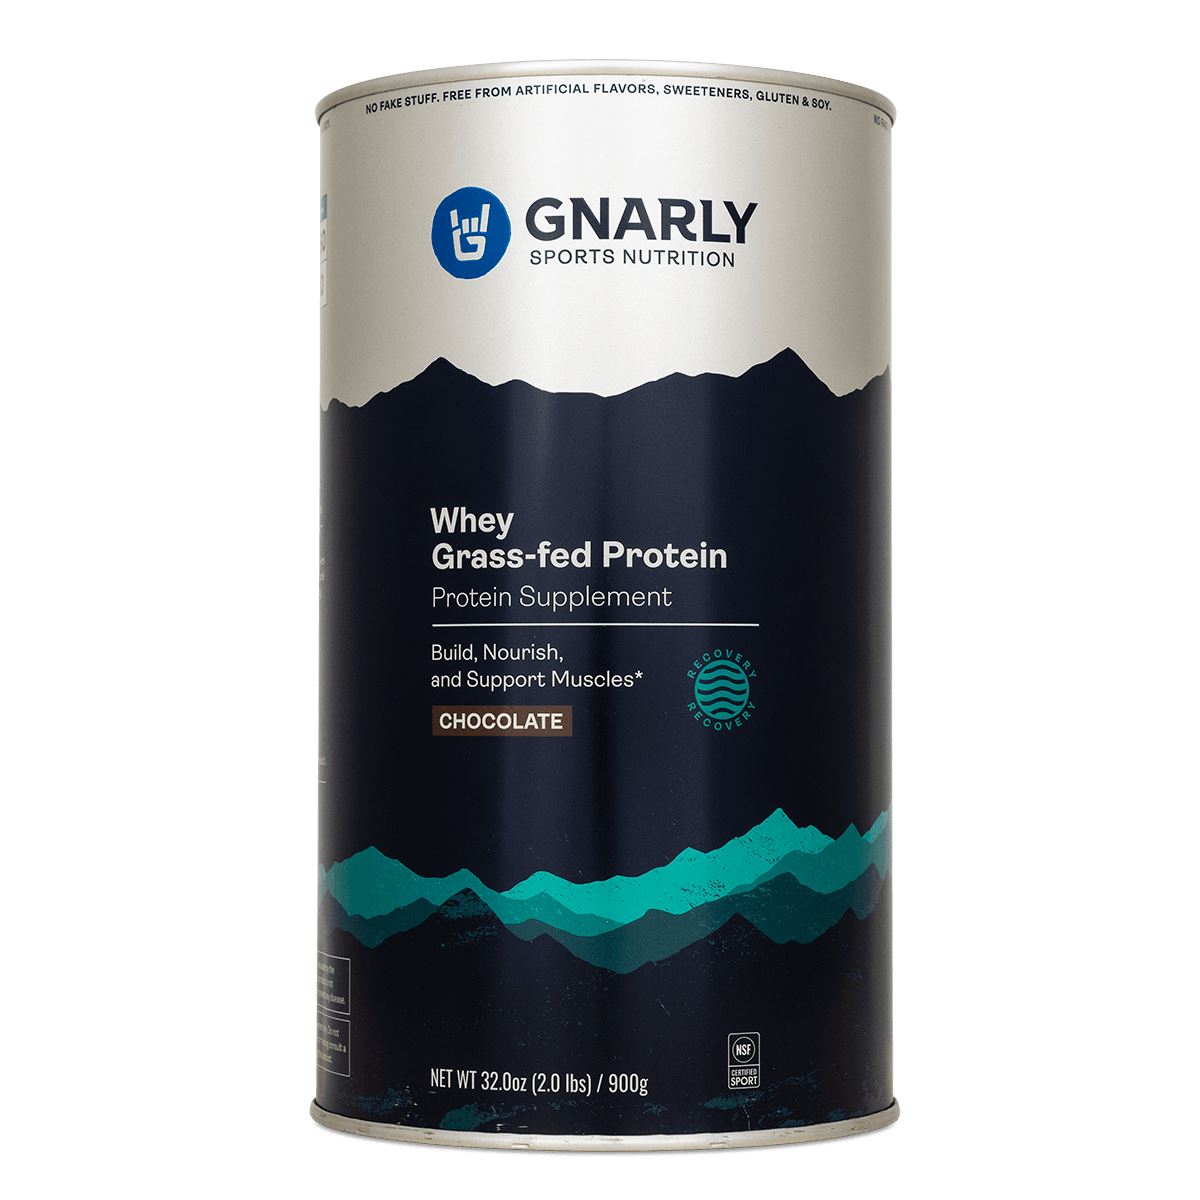 Organic Whey Protein Powder from Grass Fed Cows